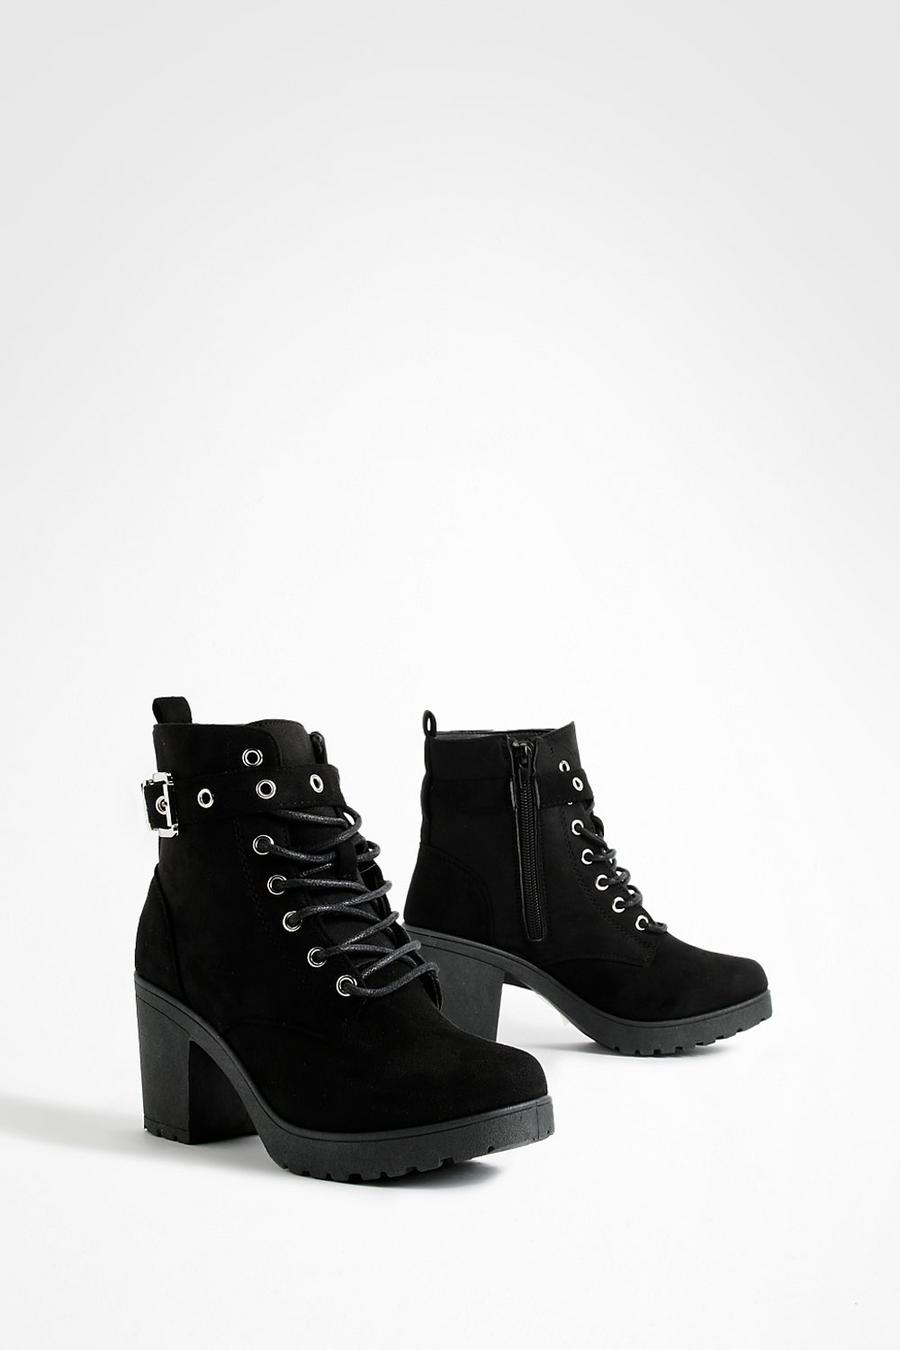 Black noir Buckle Lace Up Chunky Hiker Boots